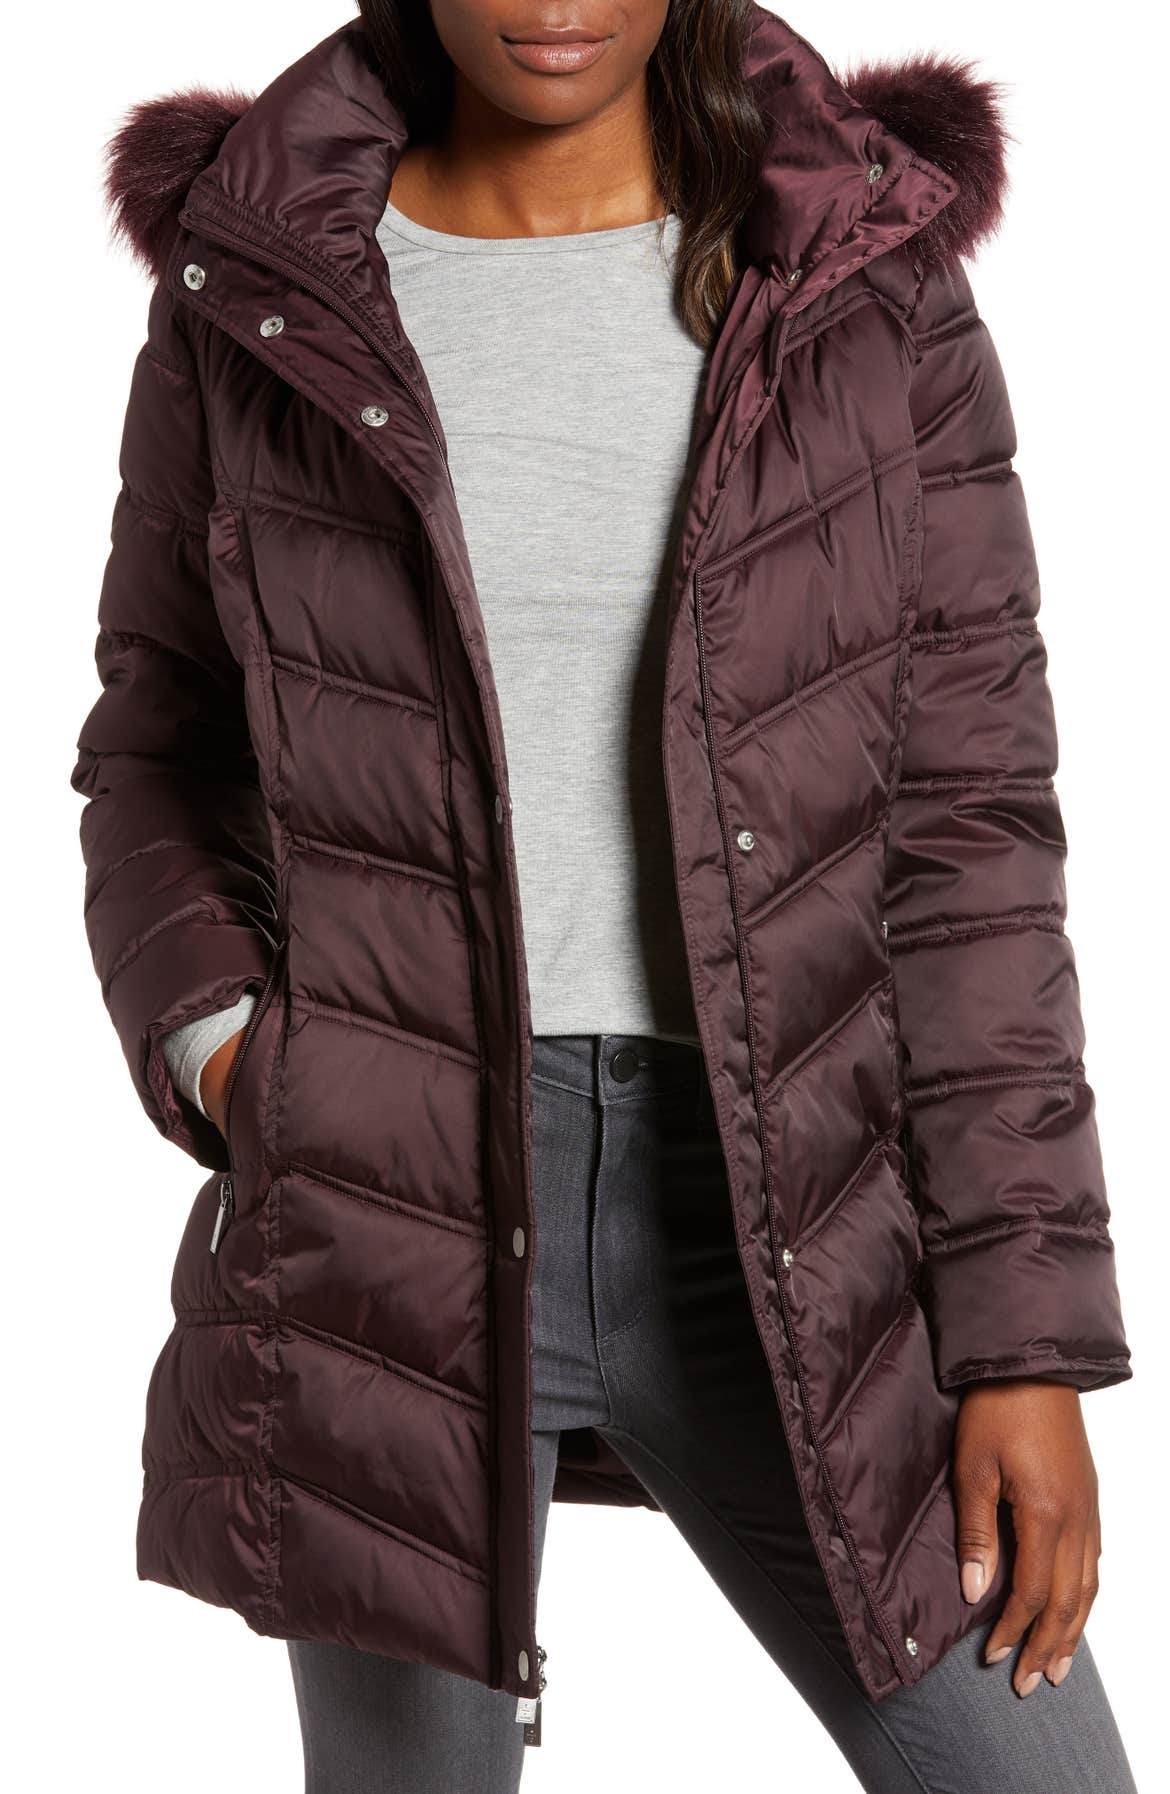 Friday Finds! Snow day styles for under $100 - Good Morning America